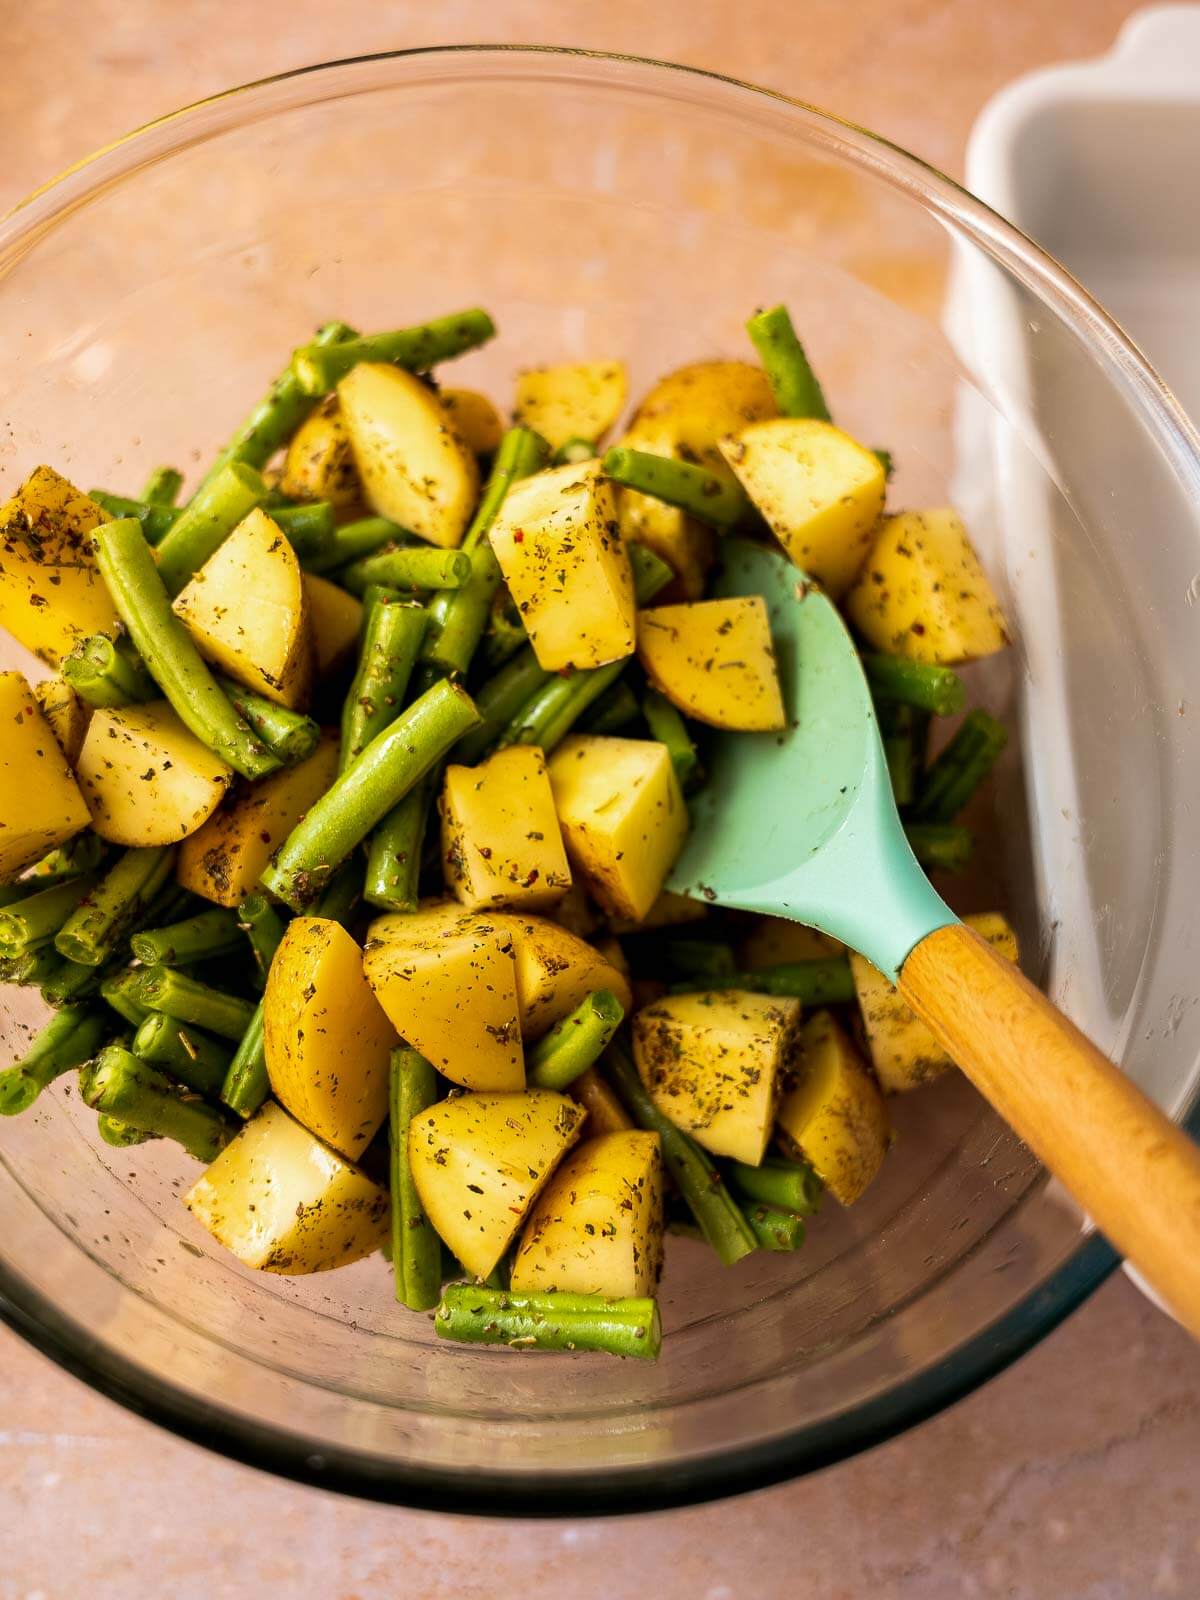 stir well until the potatoes and green beans are well coated.